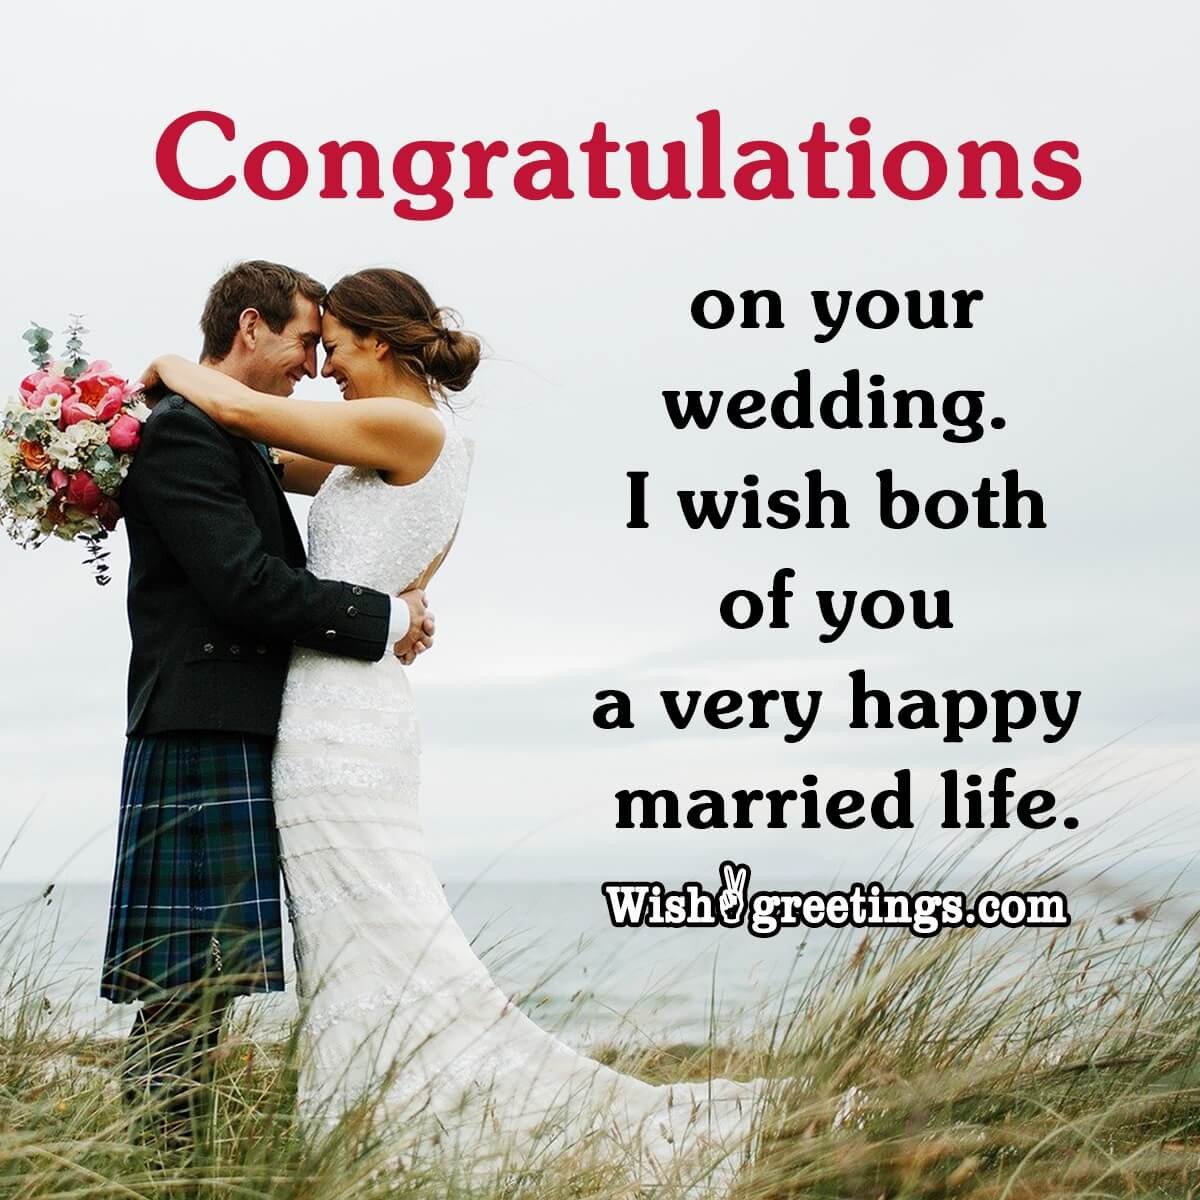 happy marriage journey wishes